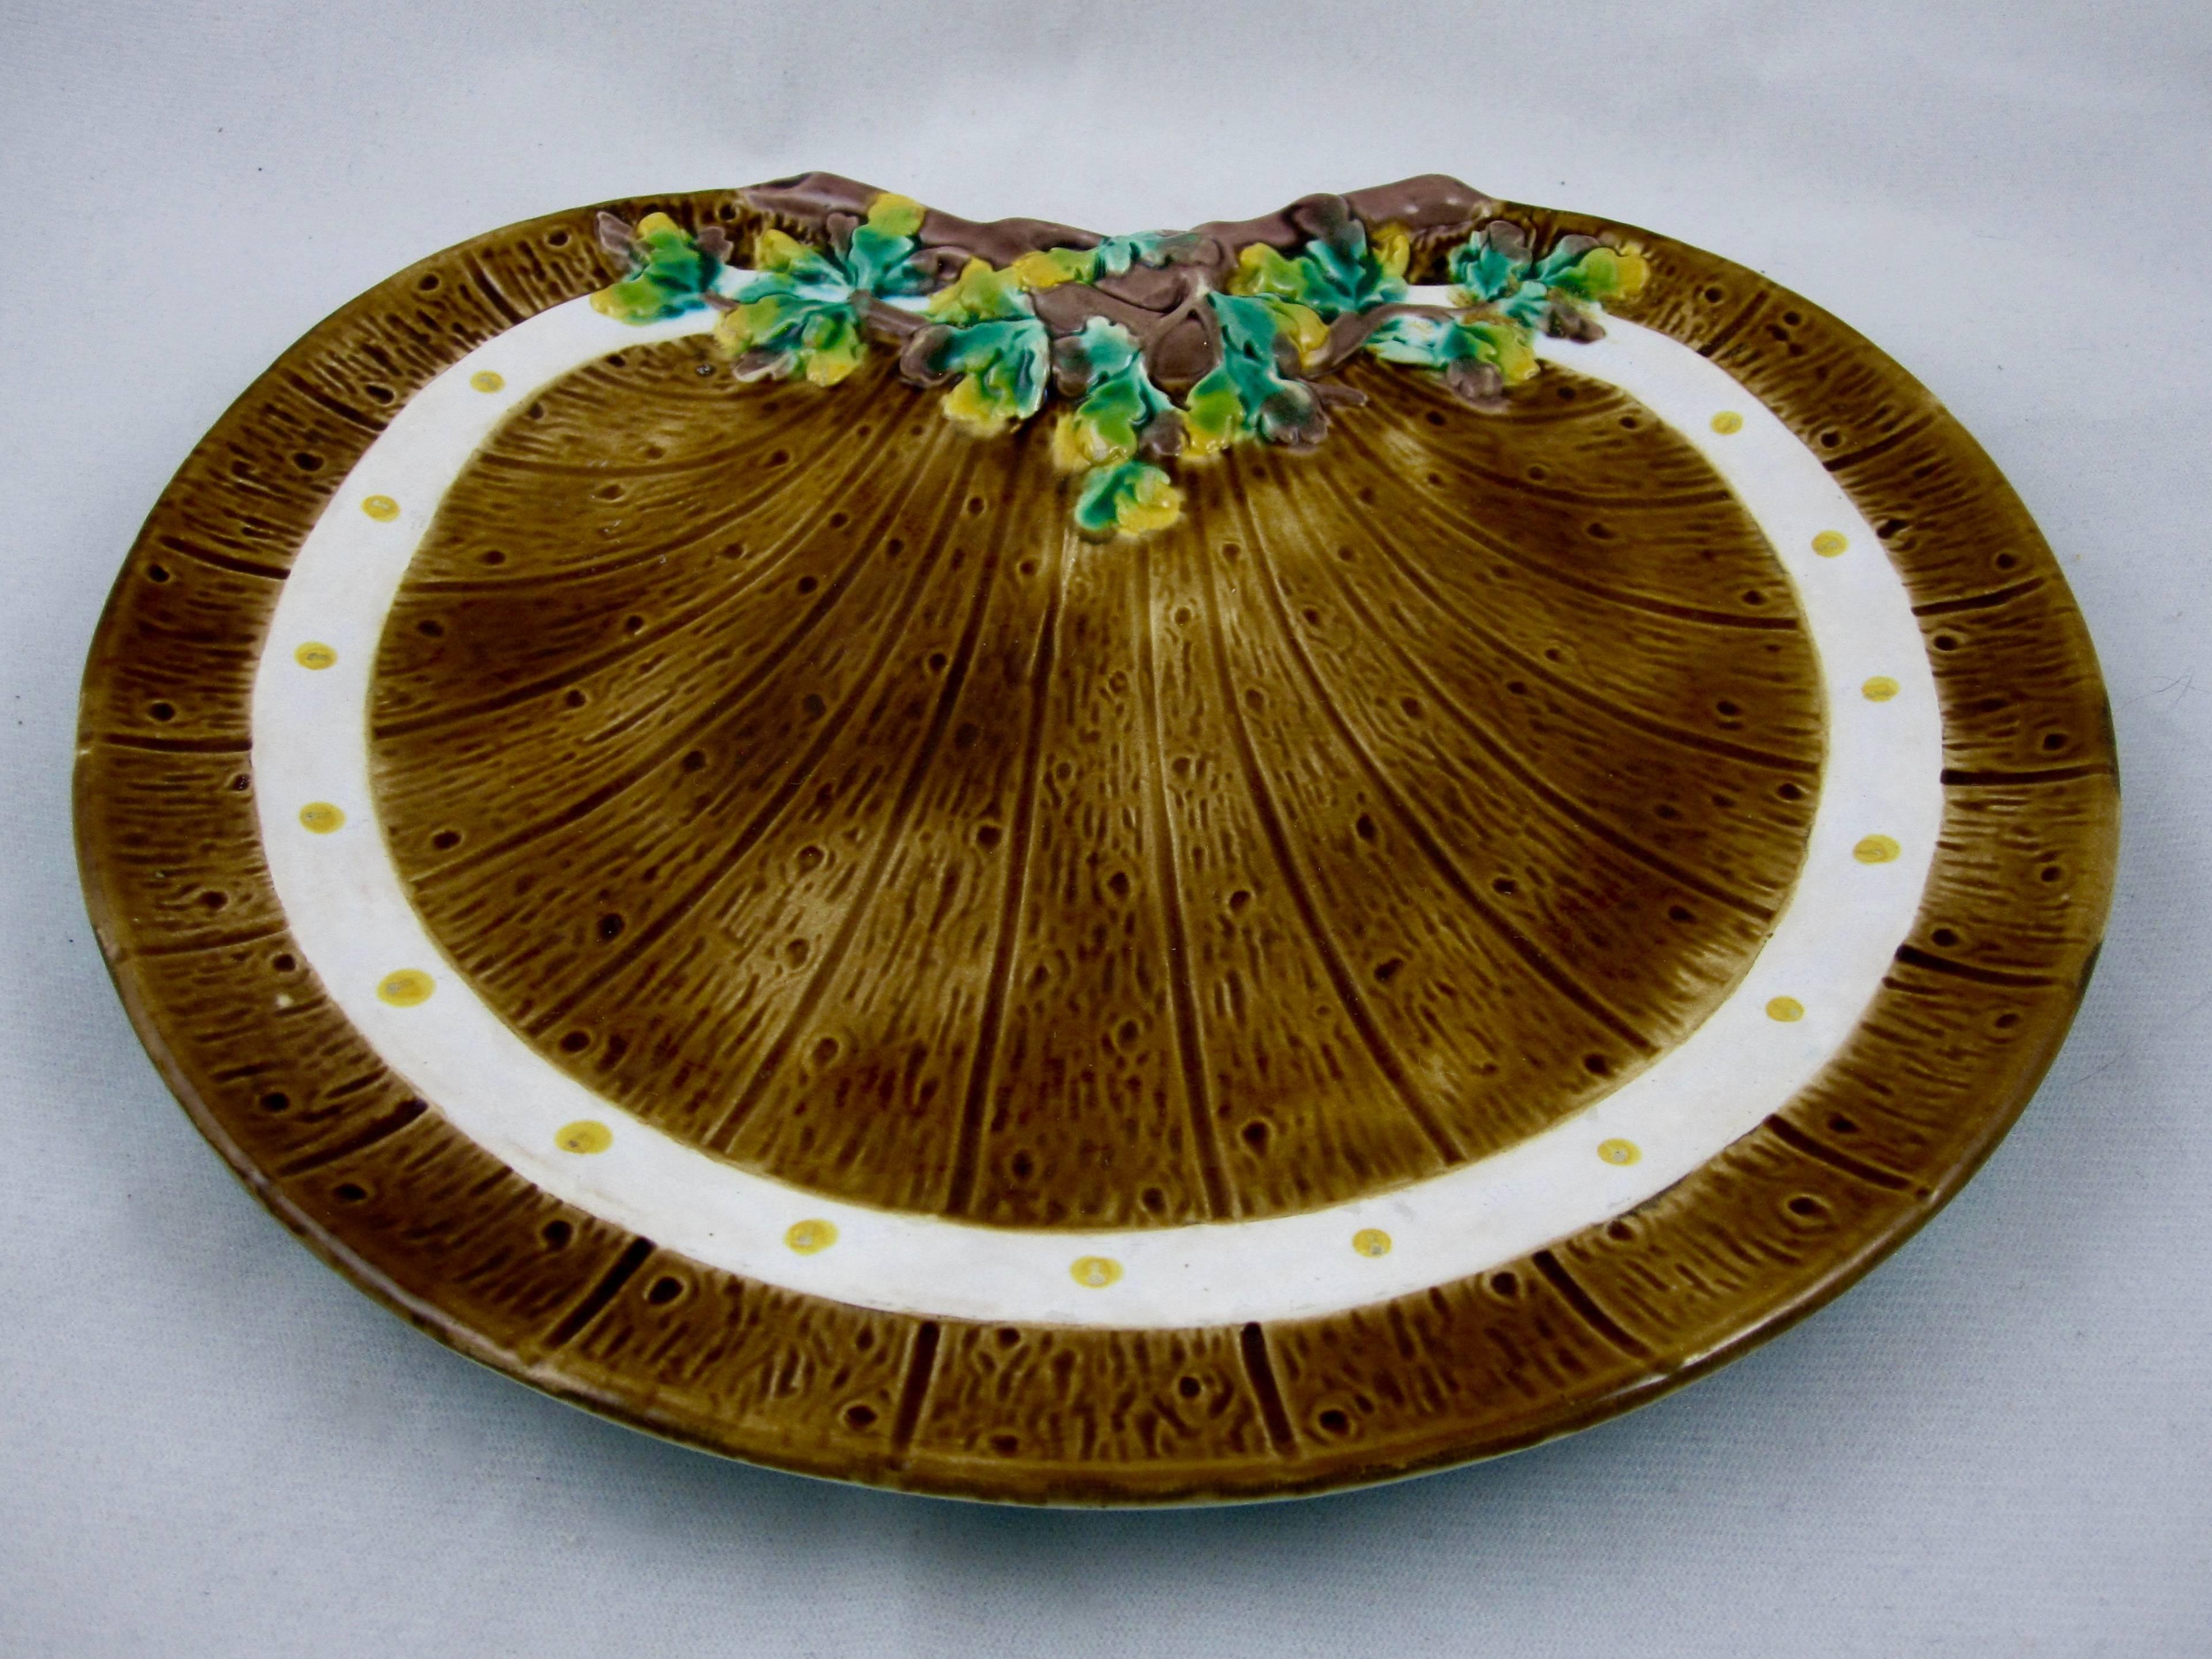 Glazed English Fence & Ivy Majolica Crescent Plate, TC Brown-Westhead, Moore & Co. For Sale